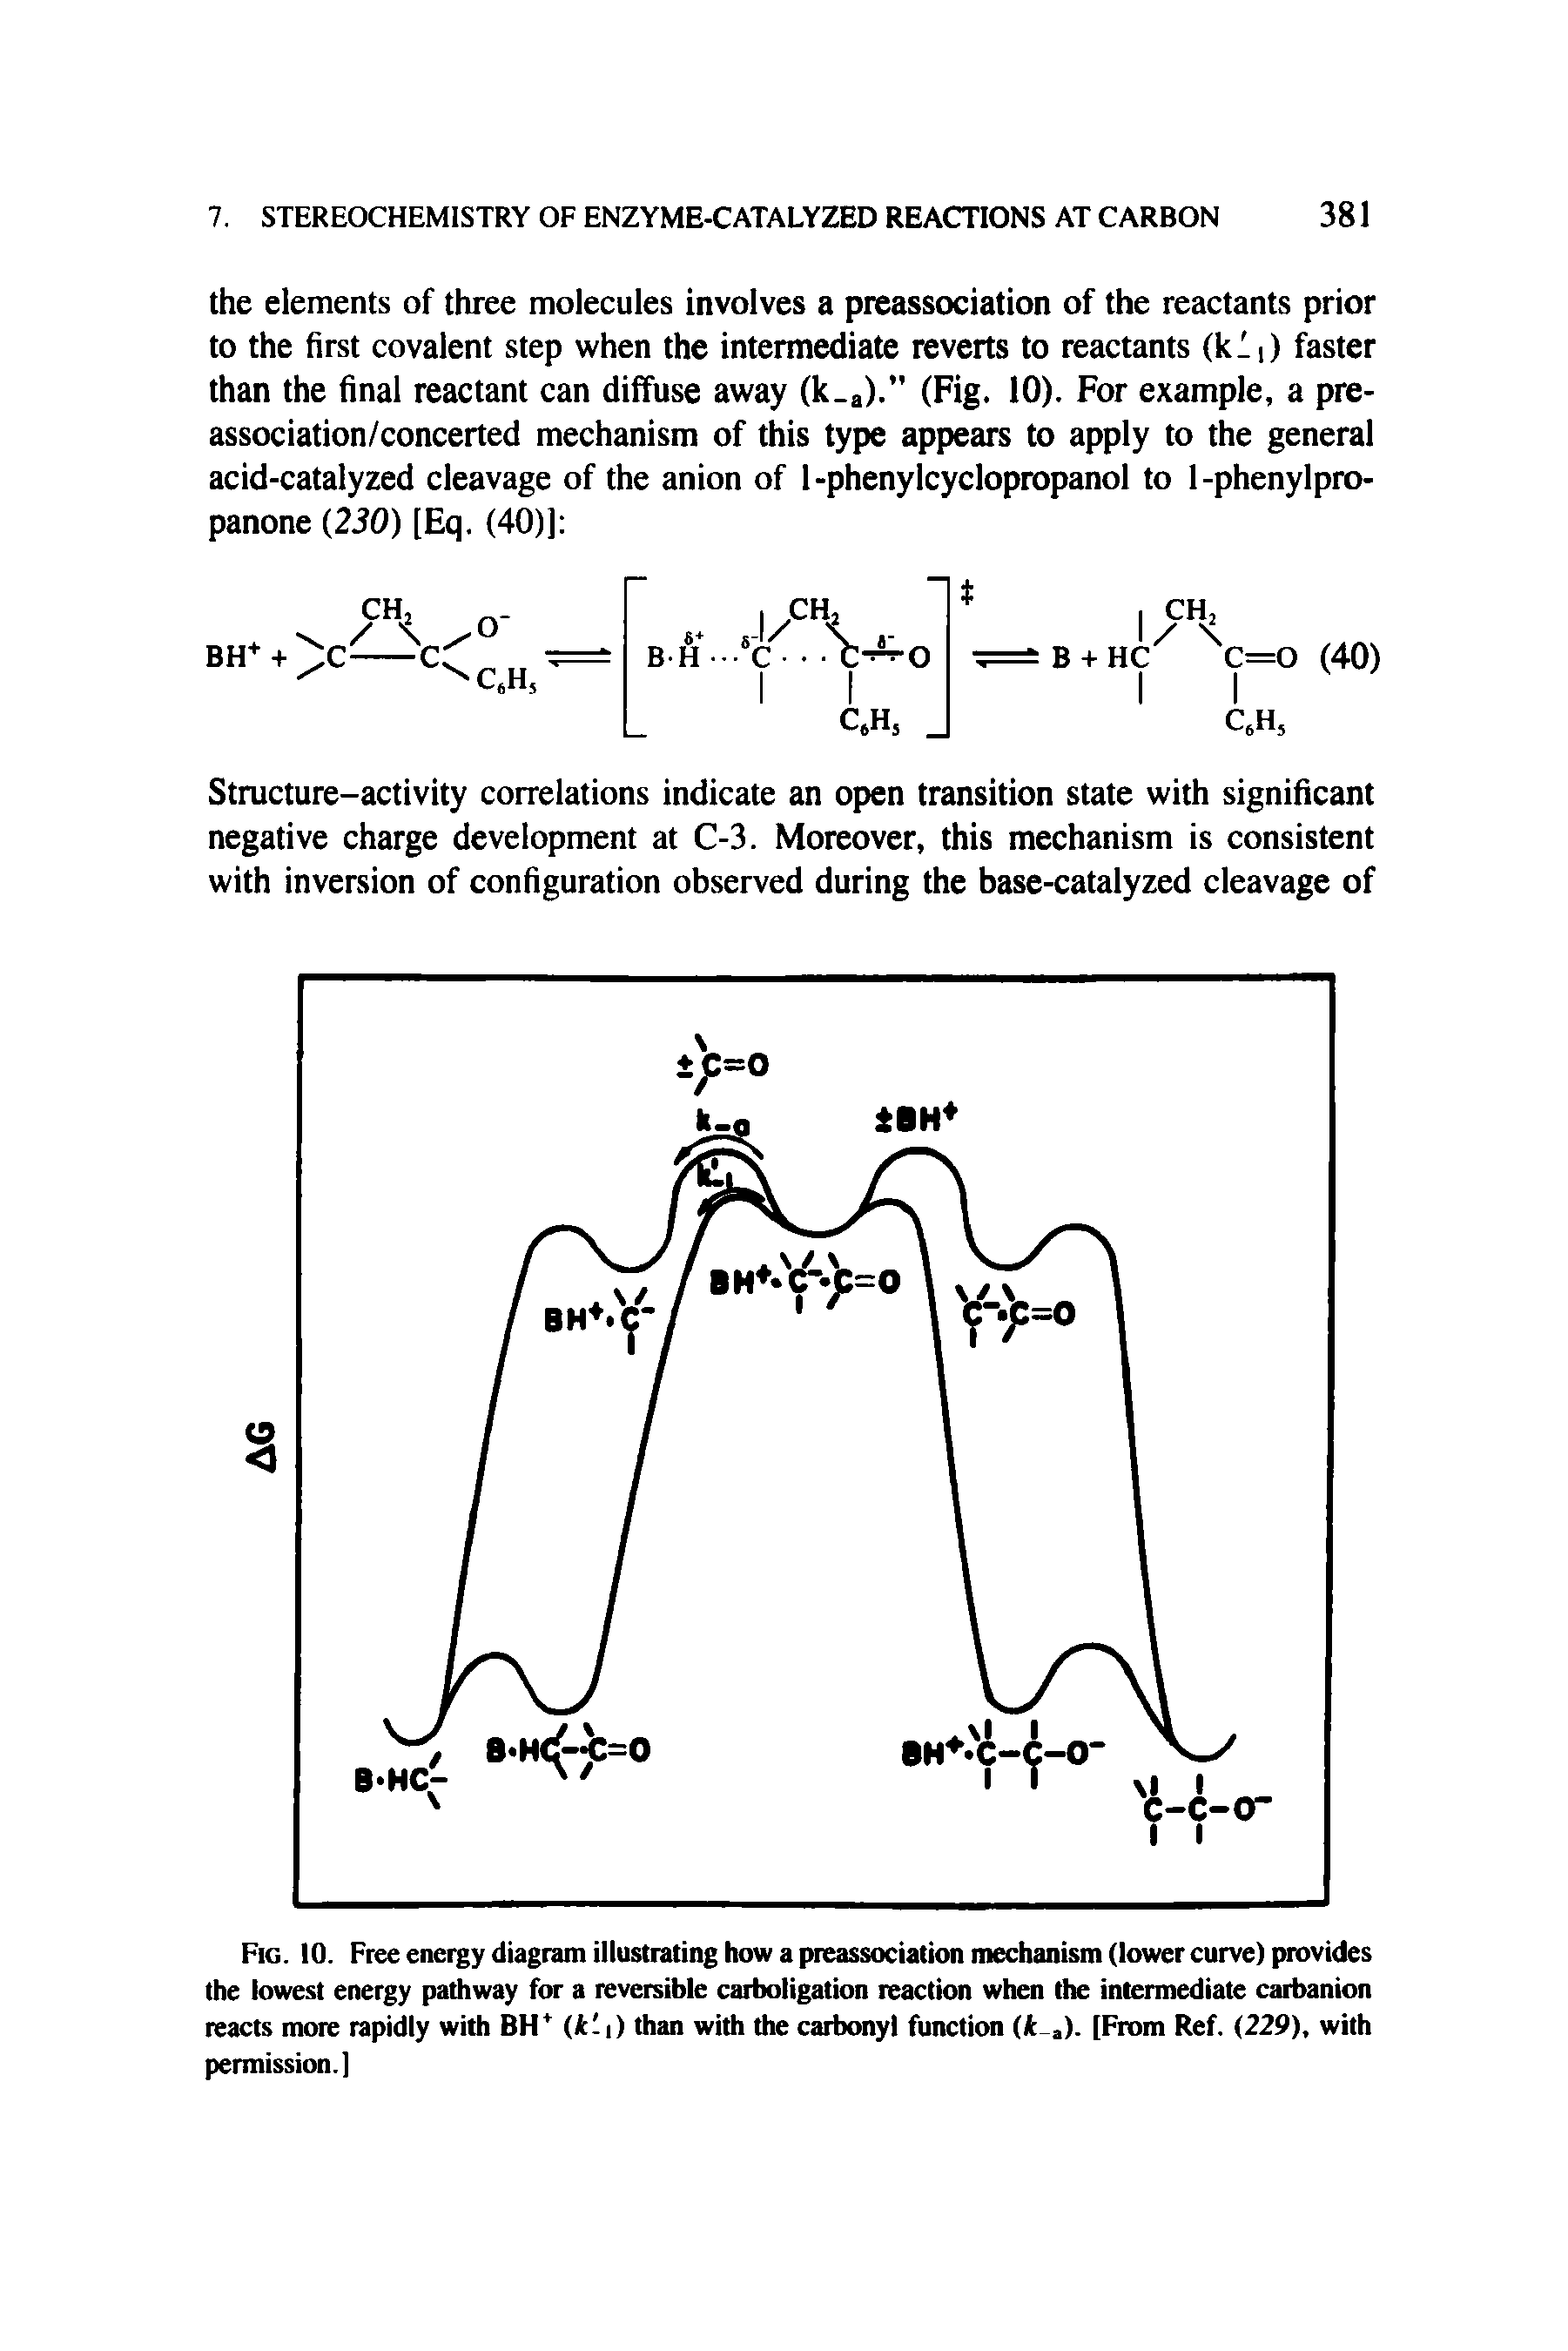 Fig. 10. Free energy diagram illustrating how a preassociation mechanism (lower curve) provides the lowest energy pathway for a reversible carboligation reaction when the intermediate carbanion reacts more rapidly with BH (k -i) than with the carbonyl function (it a). [From Ref. (229), with permission.)...